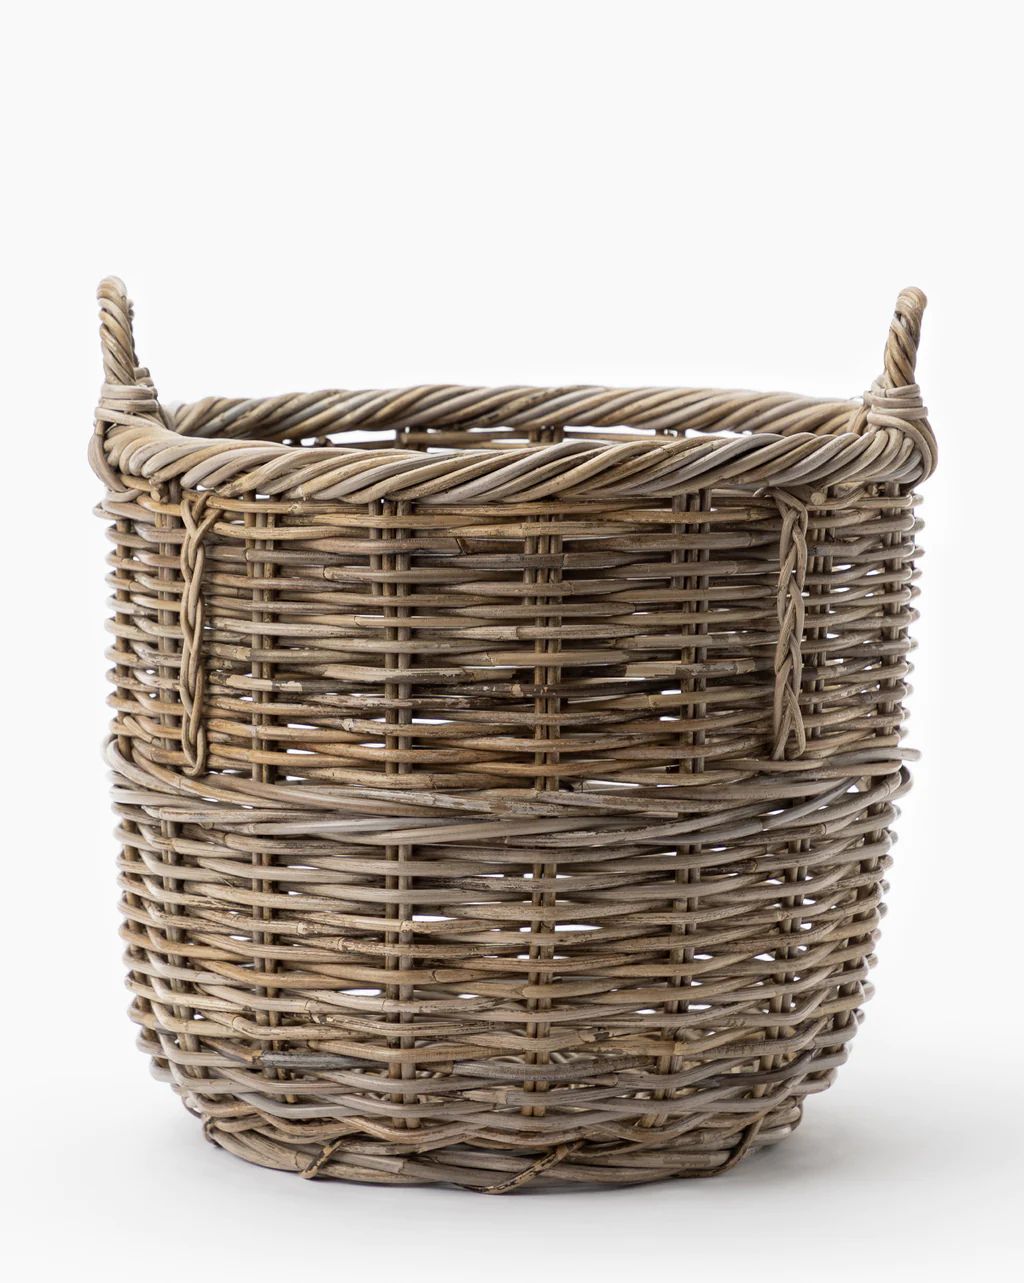 Mckell Basket | McGee & Co.